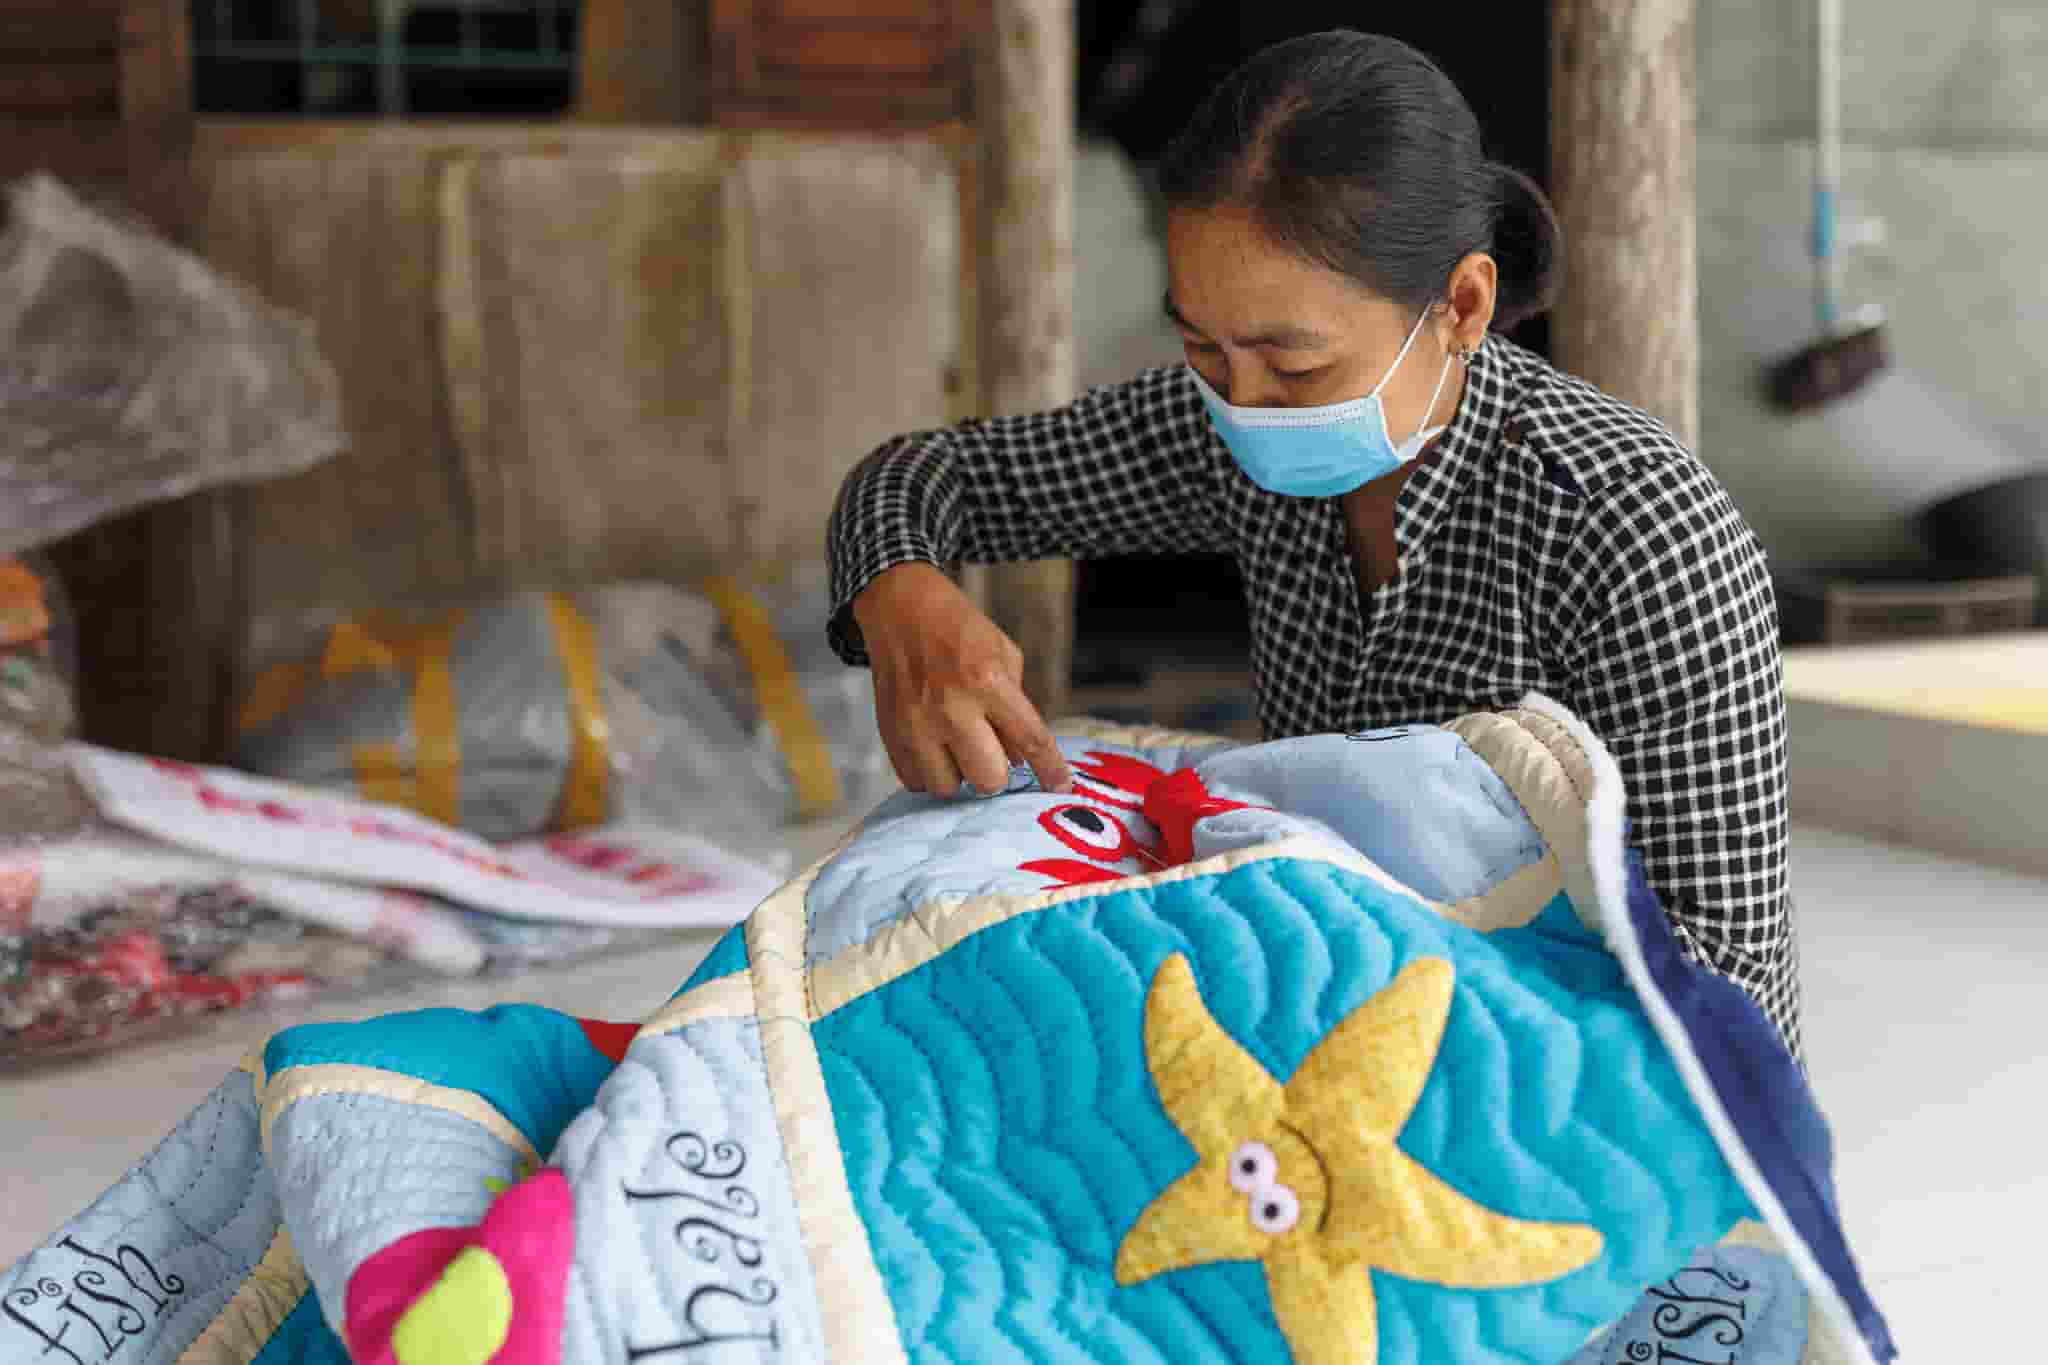 A craftswoman works on a quilt for Mekong Quilts in her home. Photo by Mervin Lee